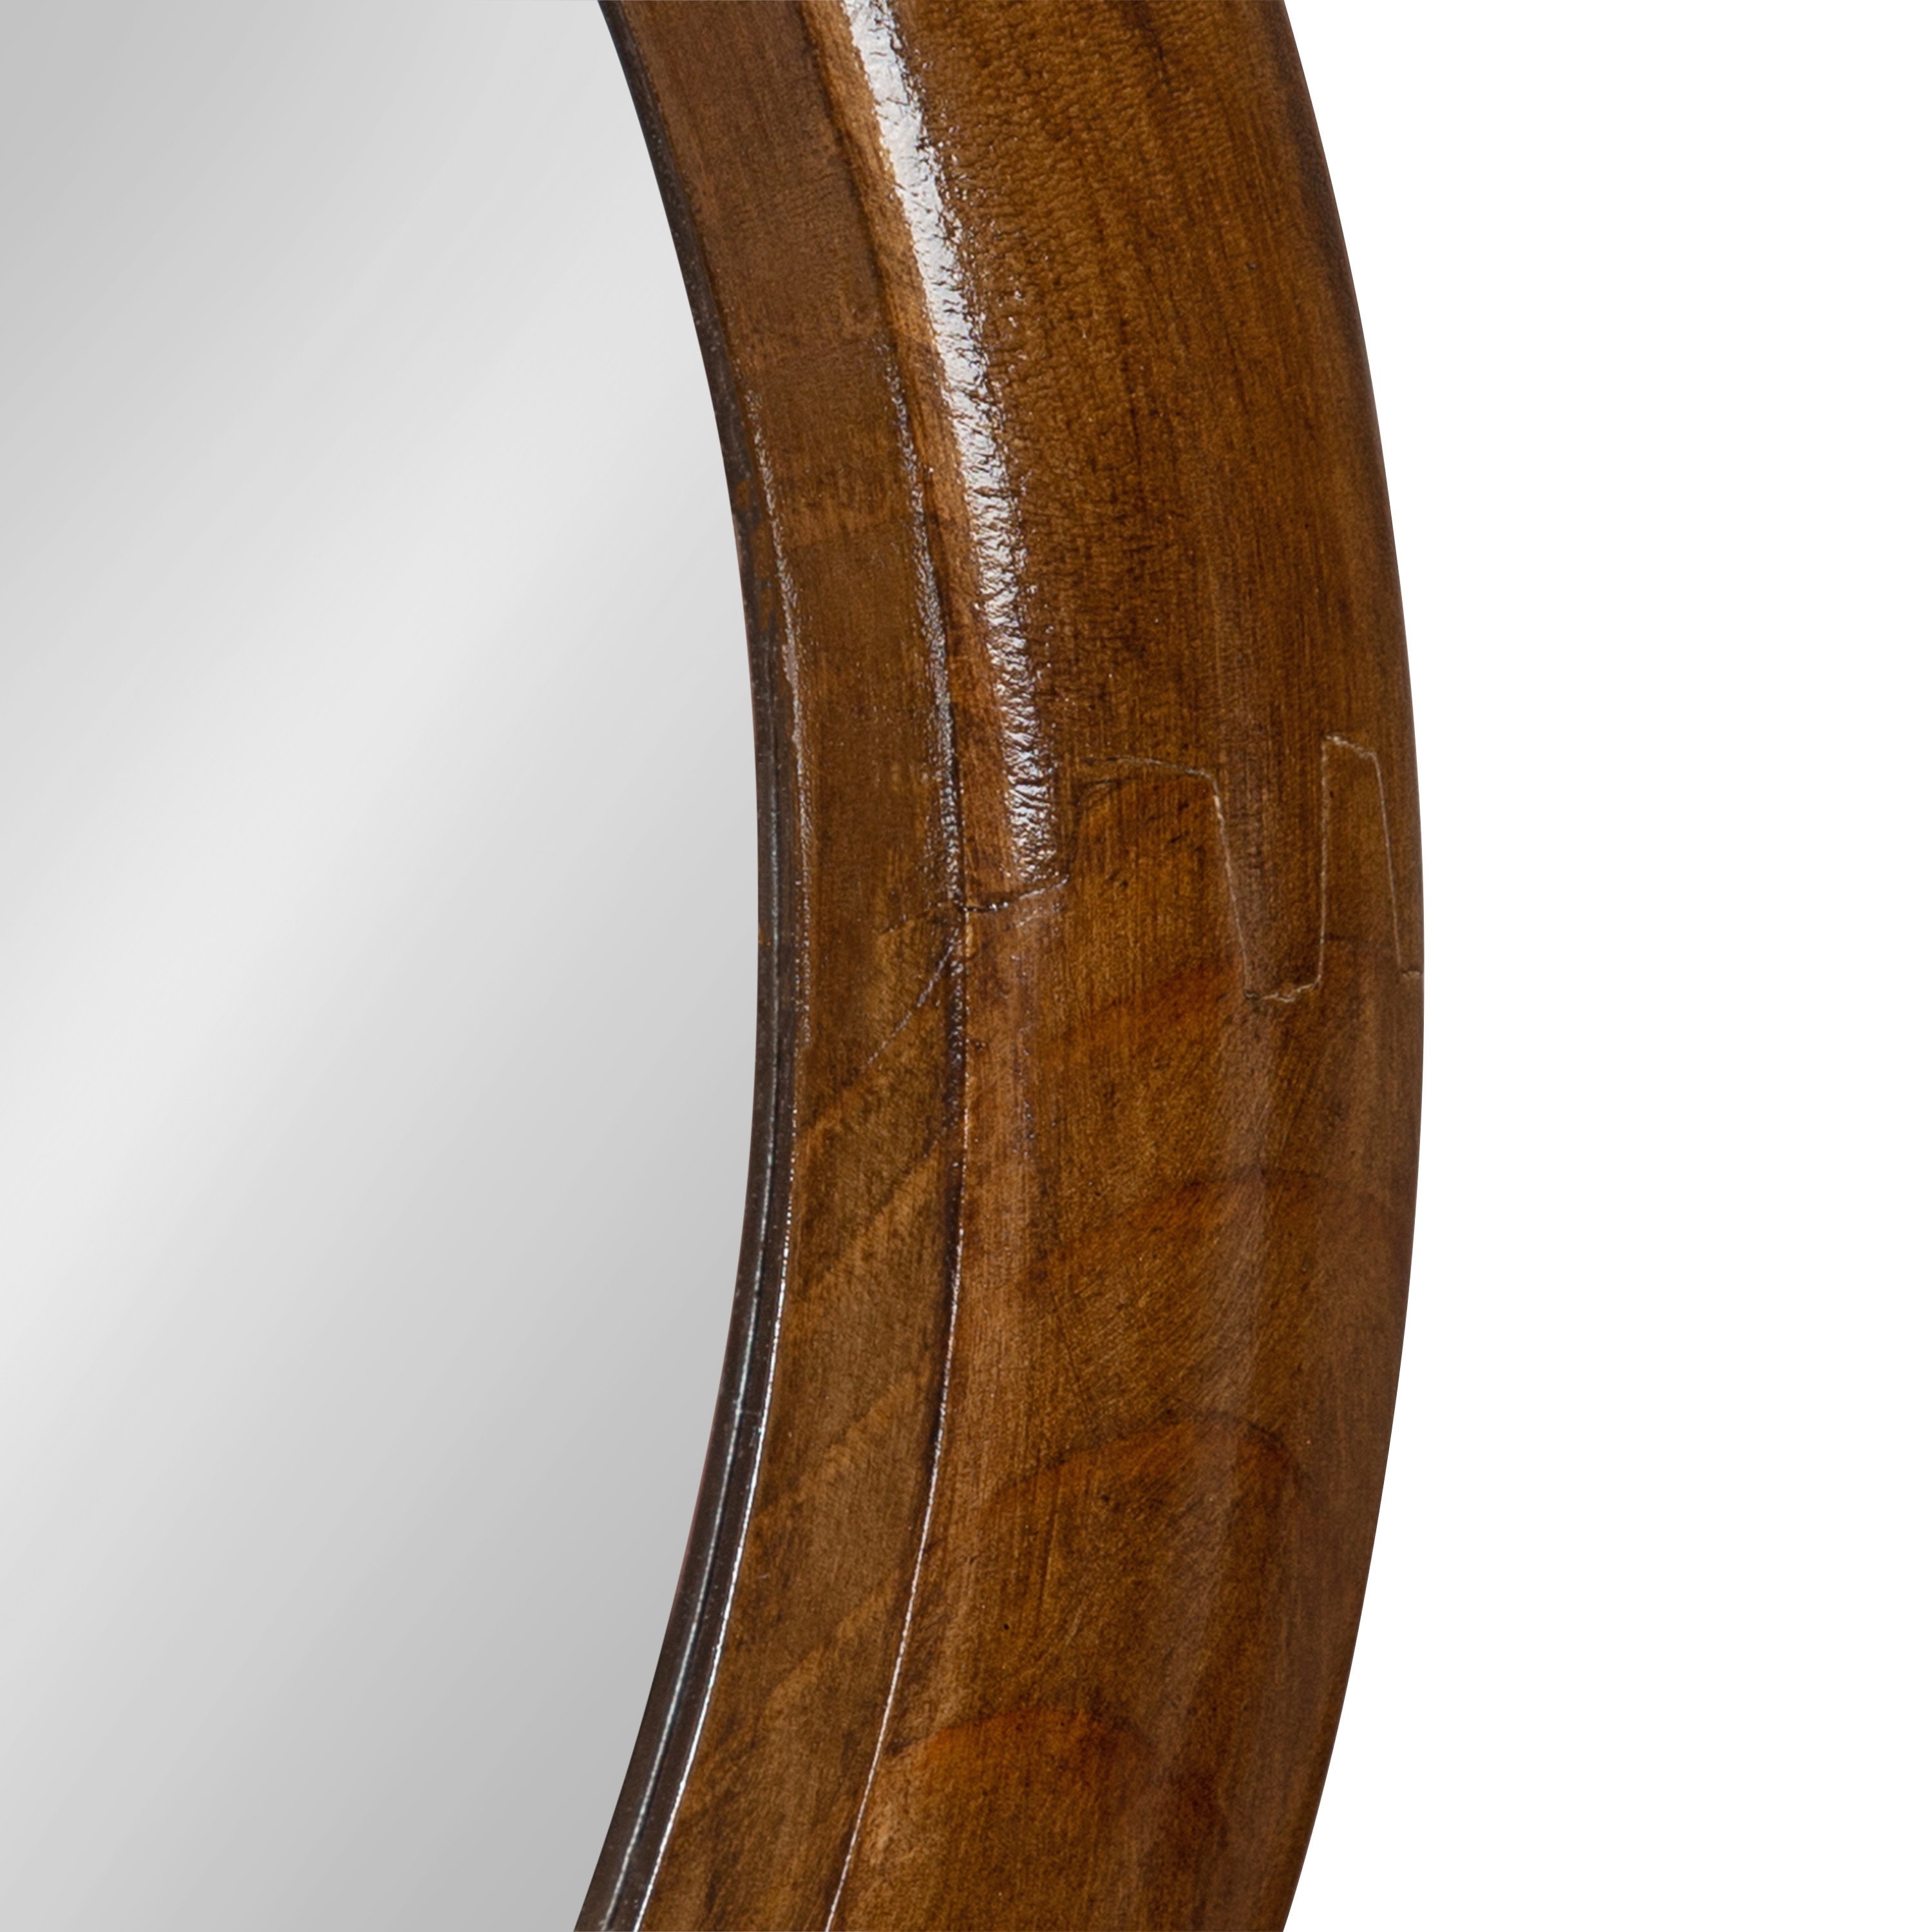 Kate and Laurel Pao 24-in W x 36-in H Oval Walnut Brown Framed Wall Mirror  in the Mirrors department at